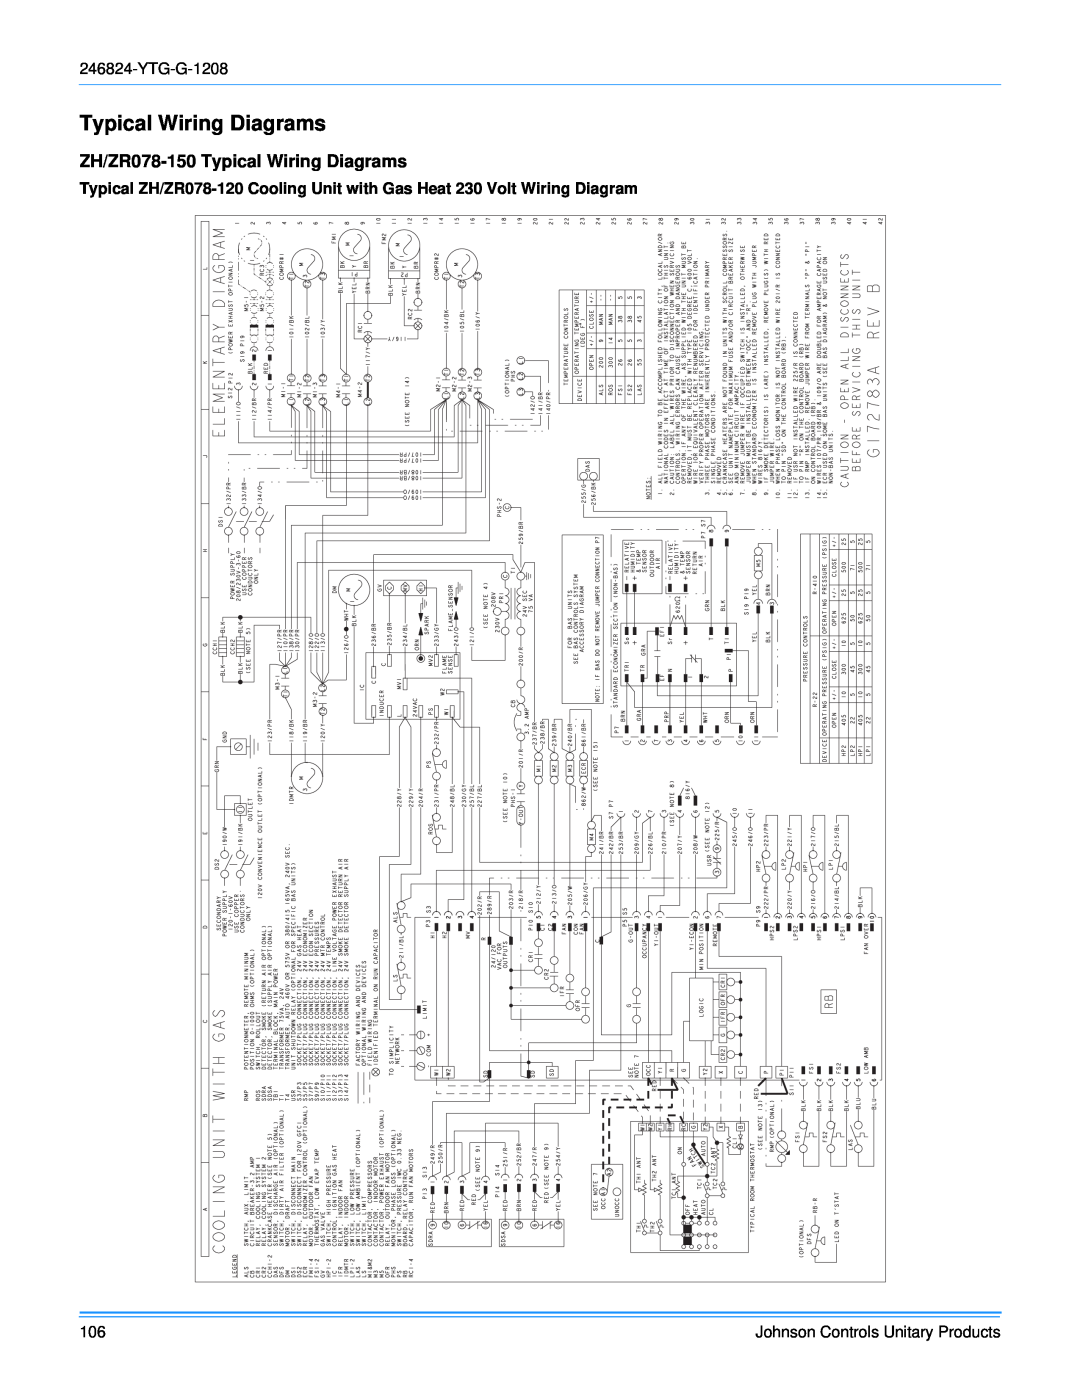 York R-410A manual ZH/ZR078-150Typical Wiring Diagrams 